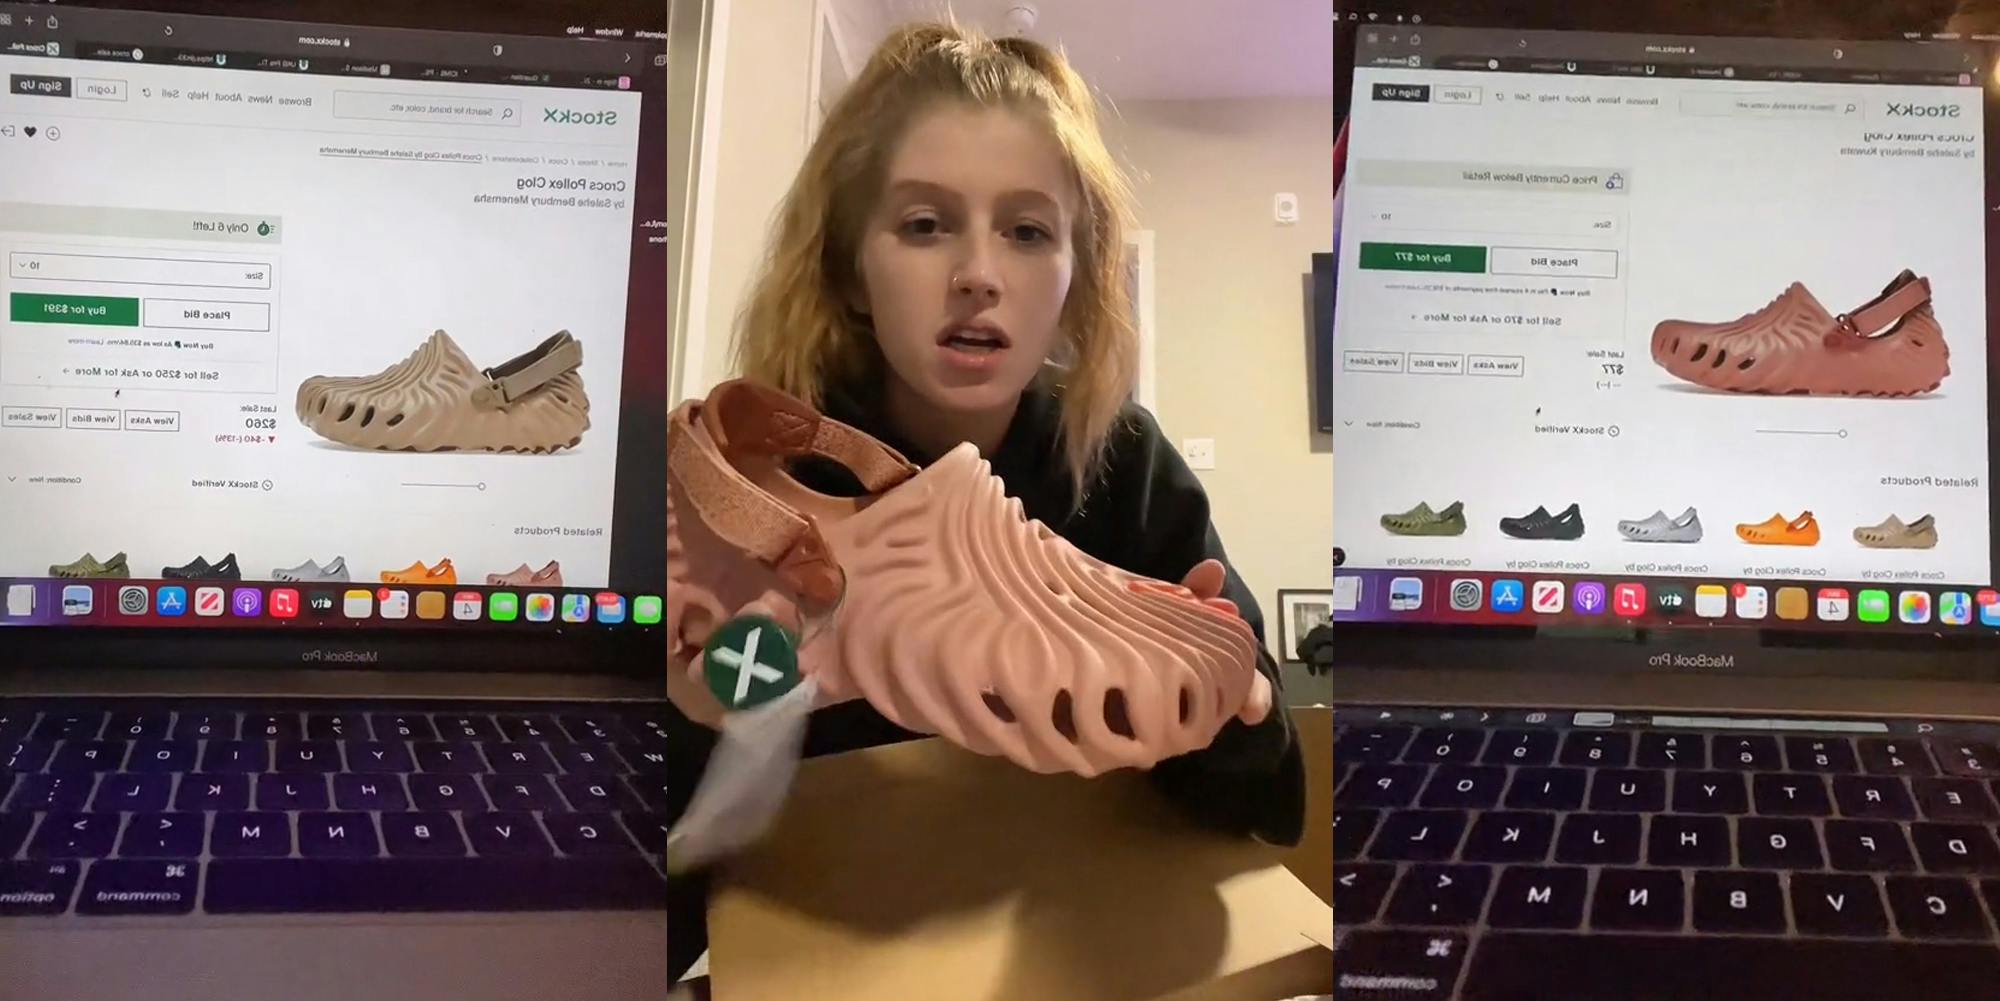 tan colored shoes on Stockx website with price at $260 on laptop screen (l) woman holding different colored shoe (c) pink colored shoes on Stockx website with price at $77 on laptop screen (r)